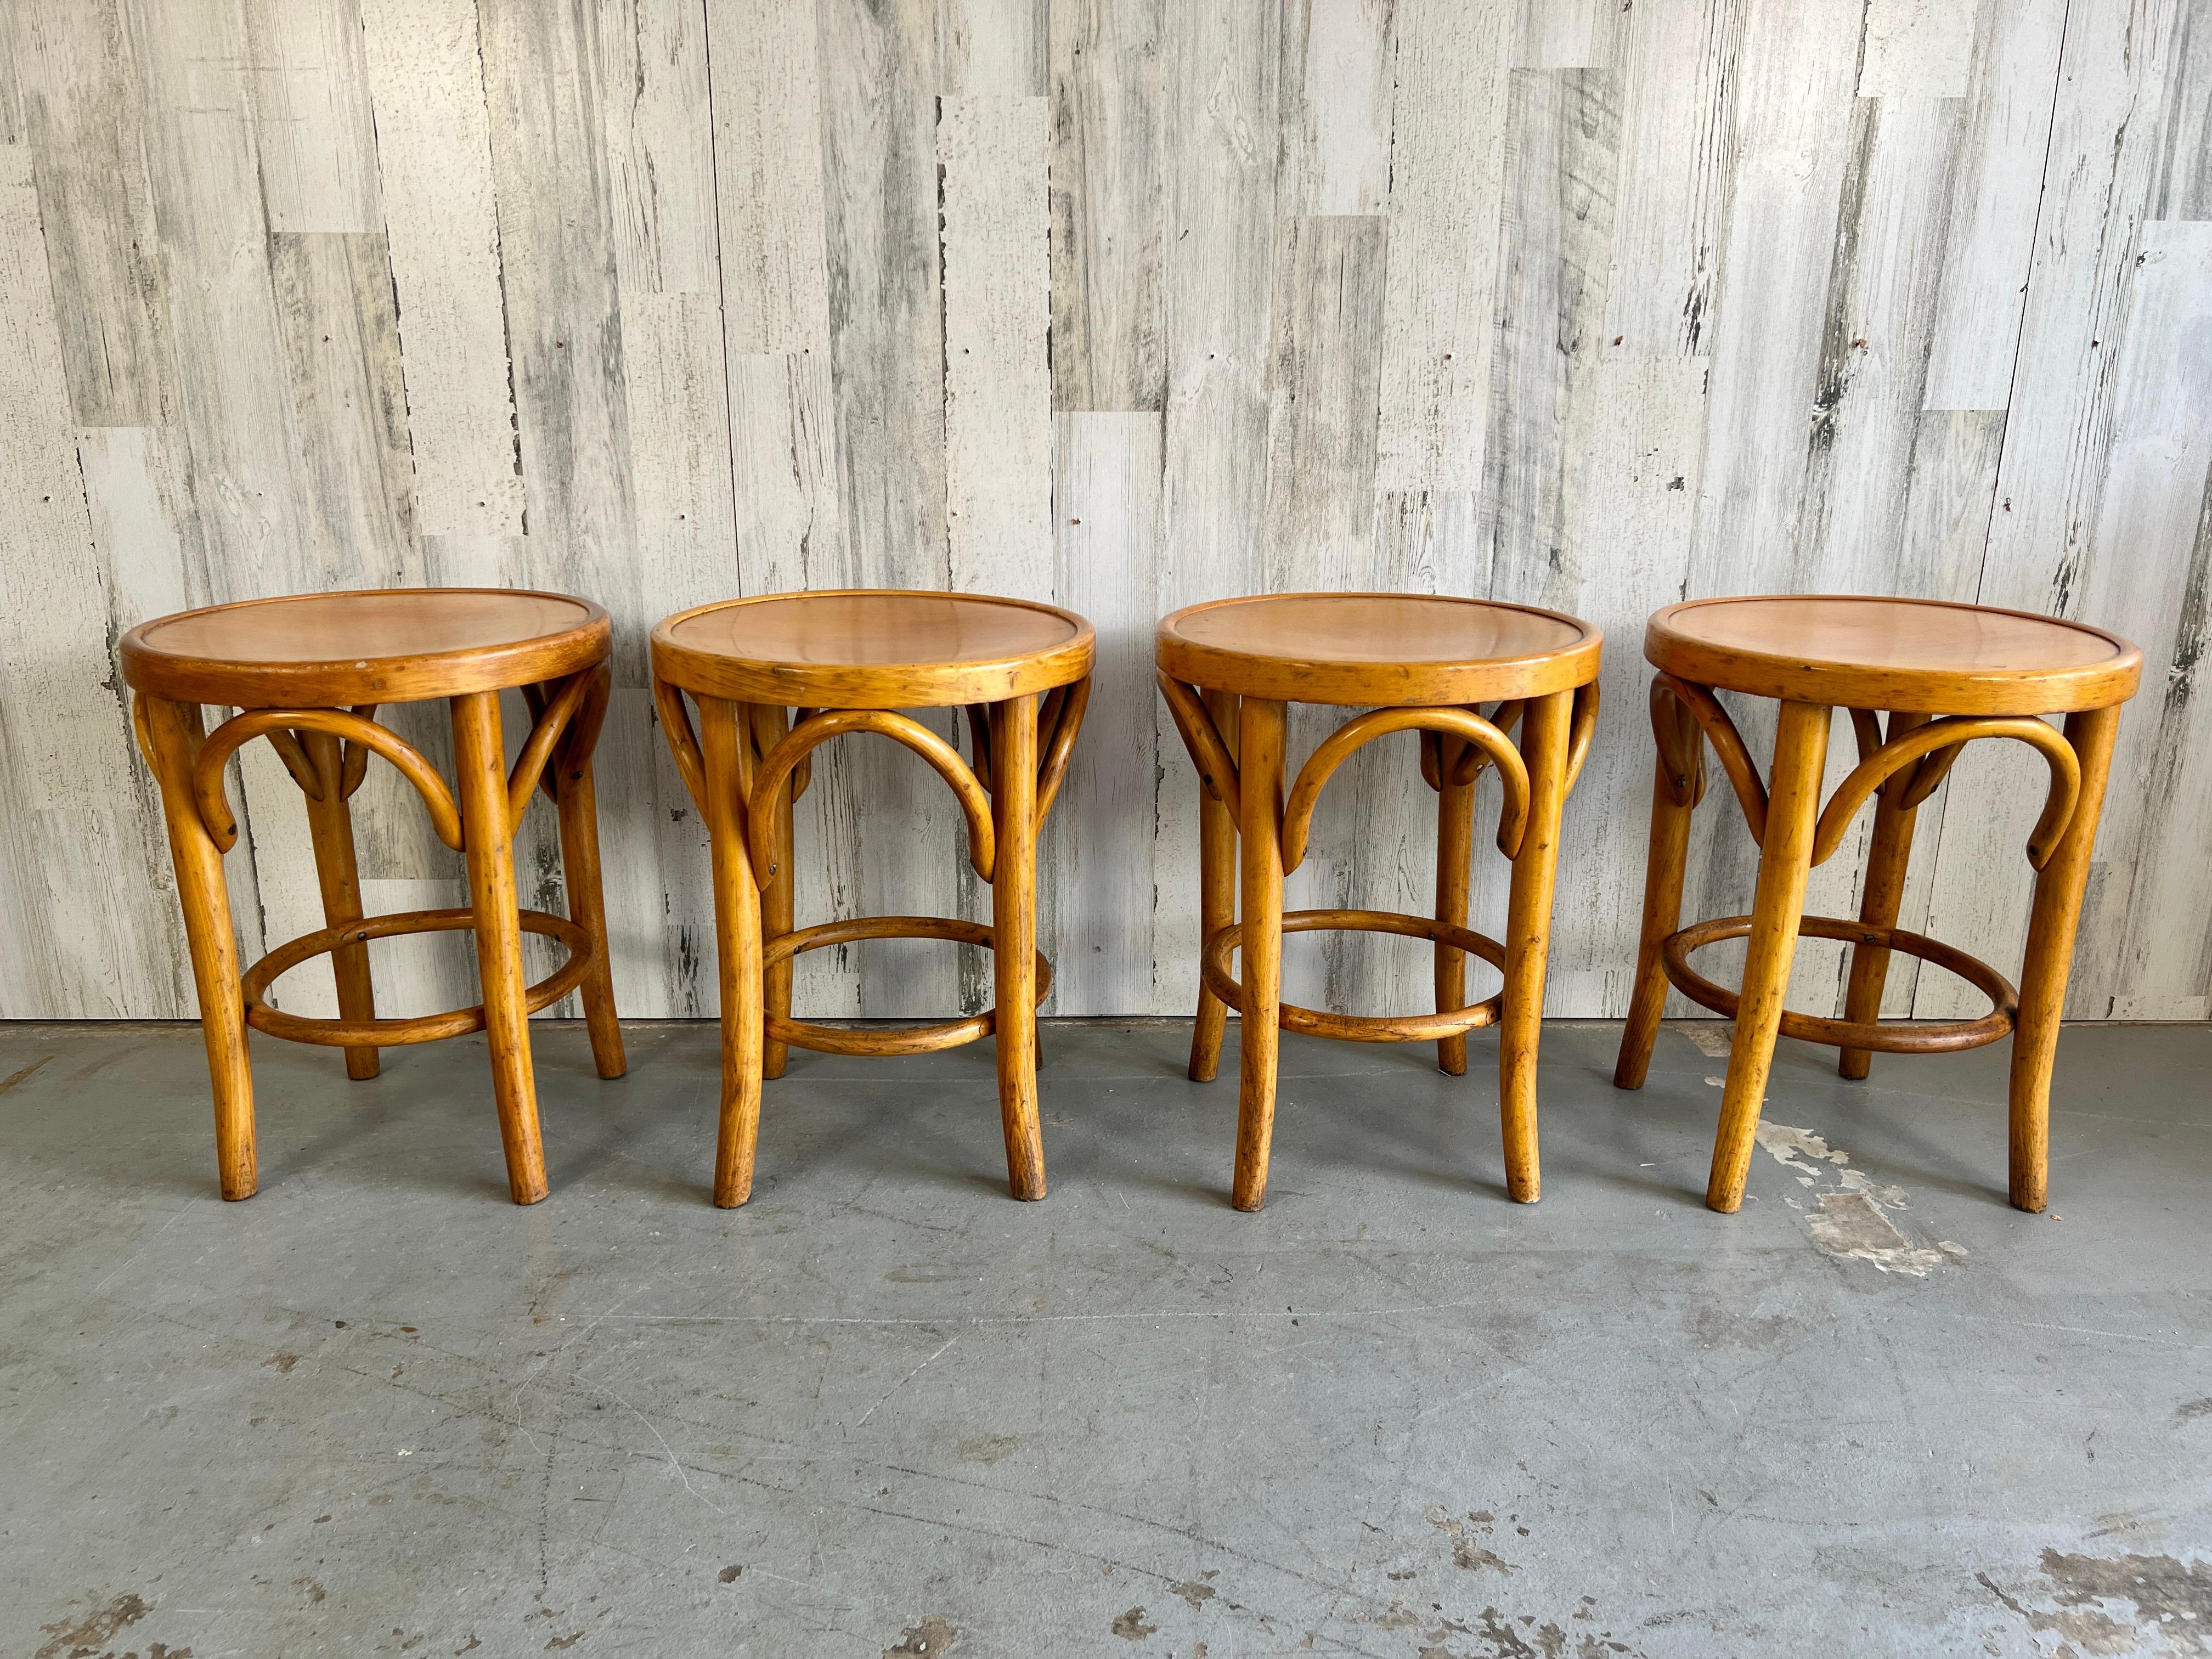 Hard to find a set of four Thonet bentwood stools in original finish, very sturdy with all the lines of classic Thonet.